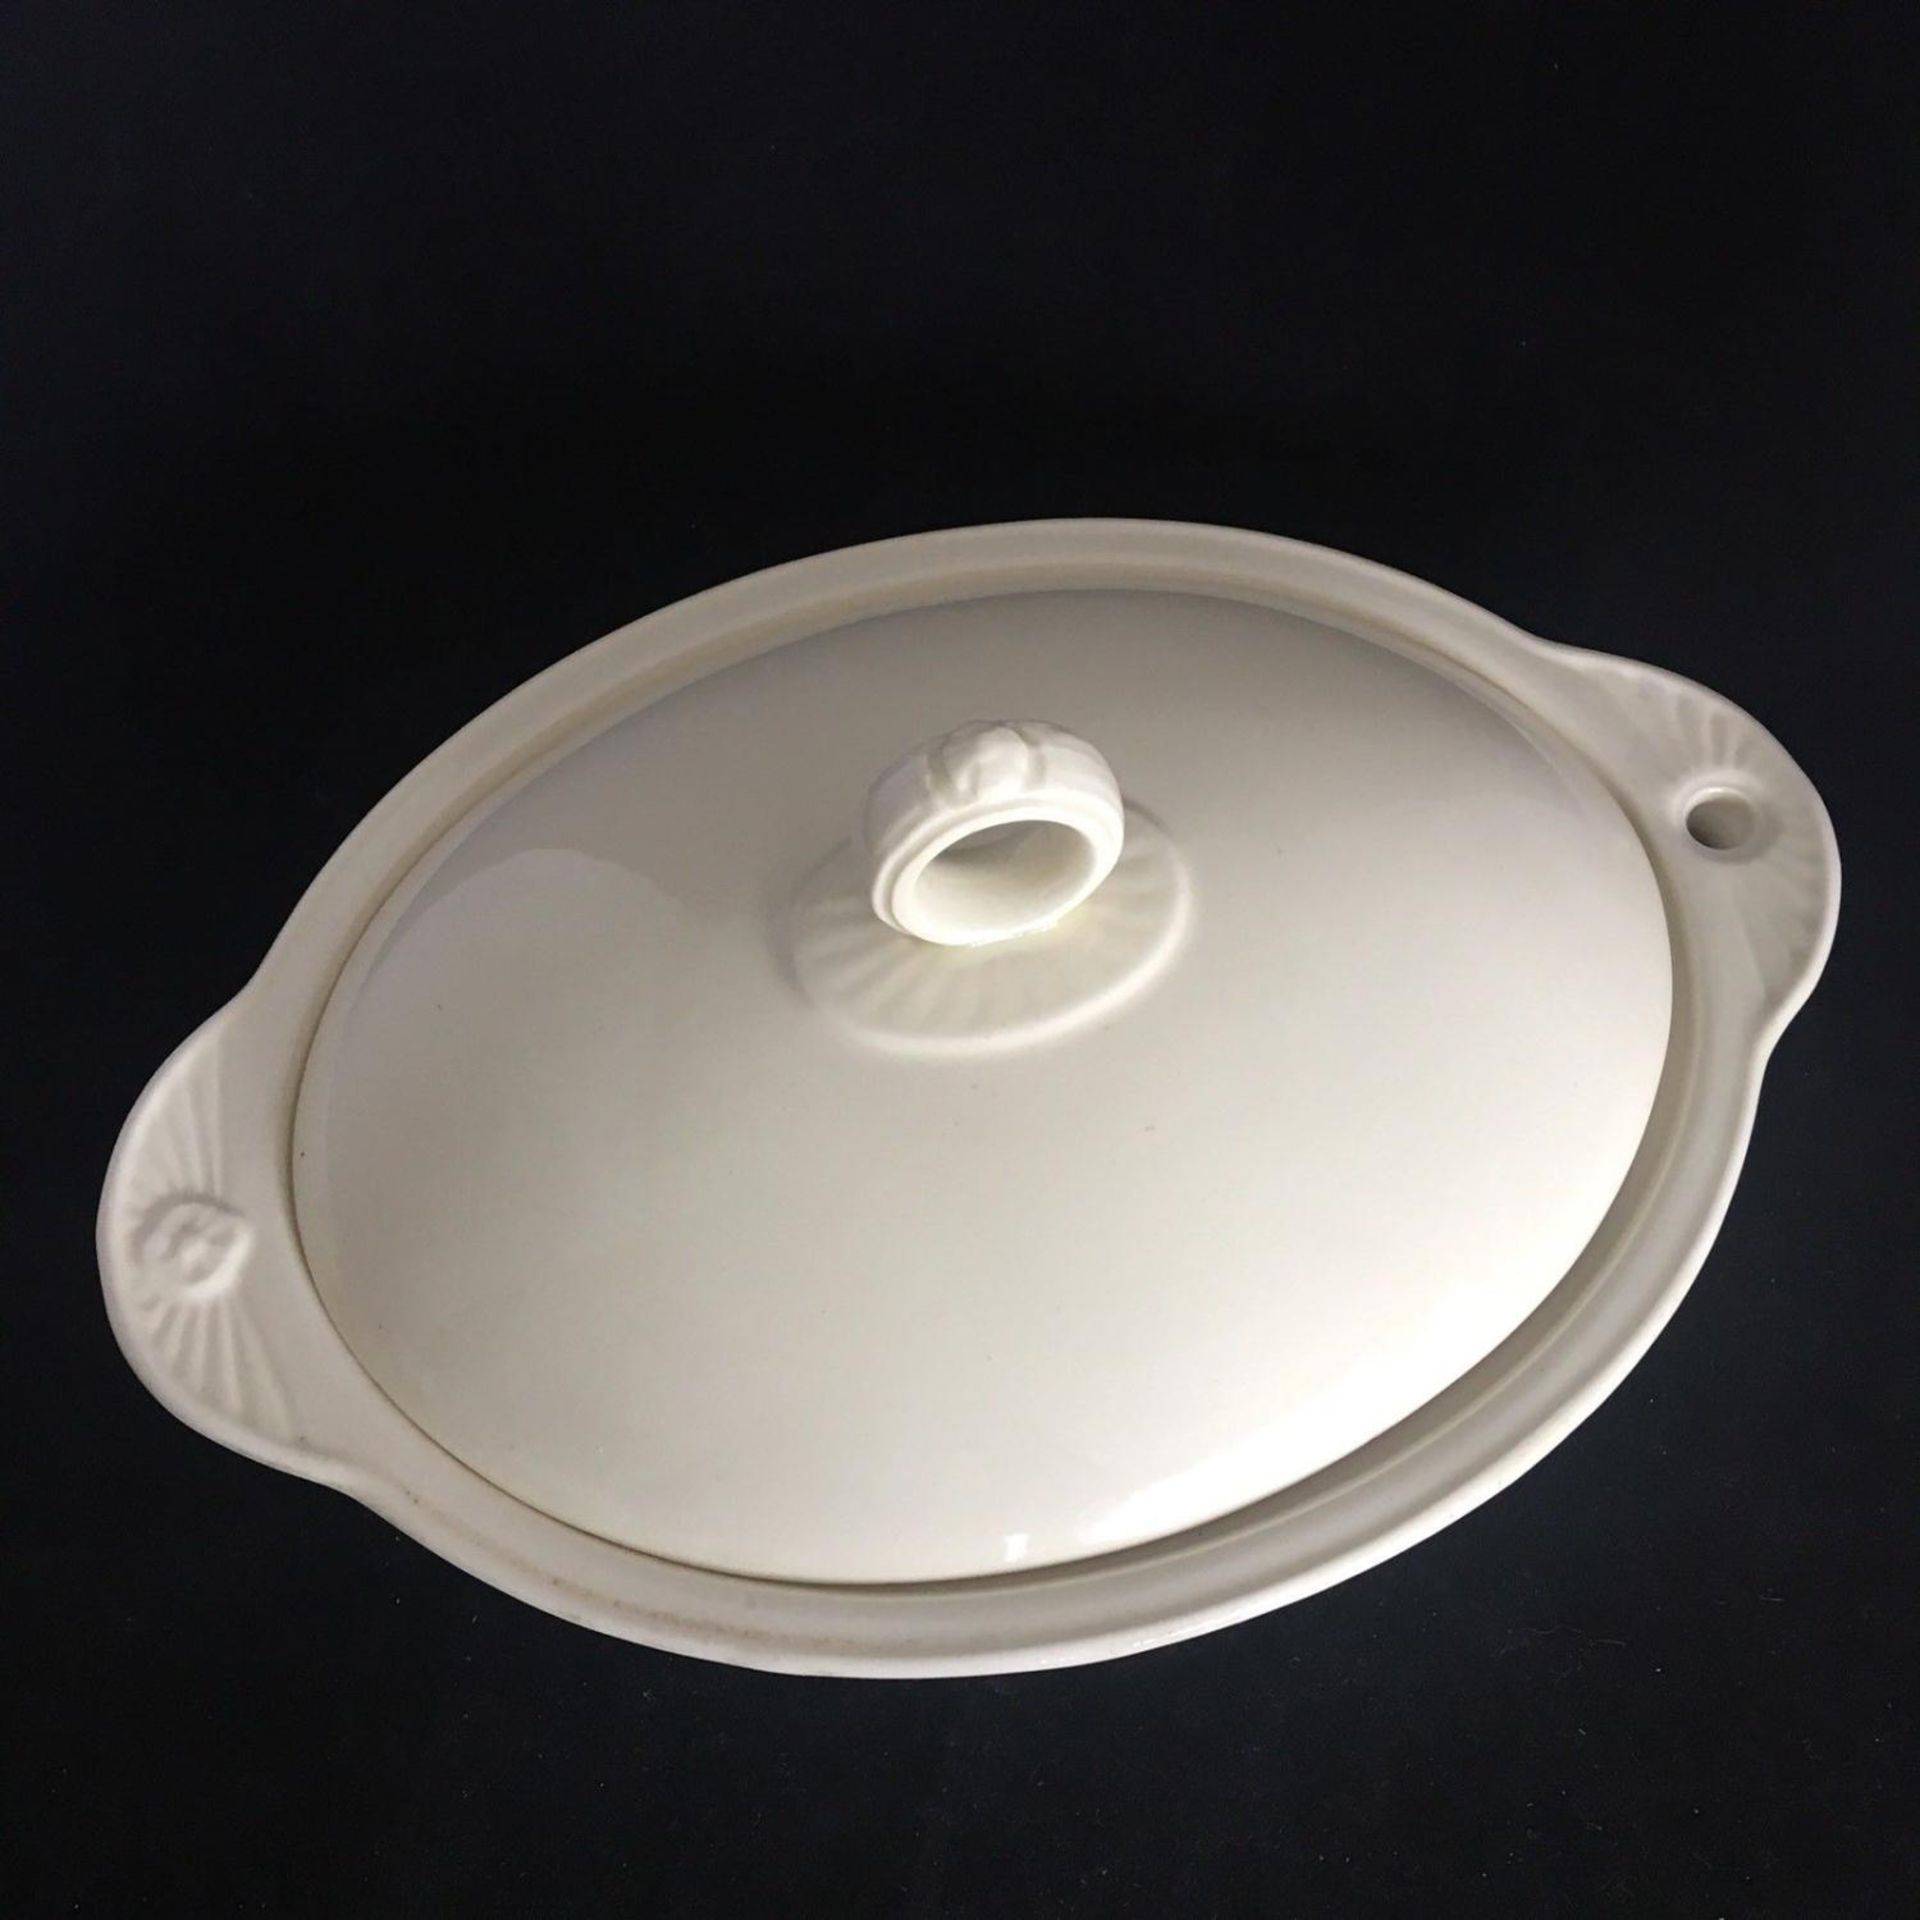 19th Century Wedgwood Cream Warming Dish Plate & Cover Meat Serving Platter - Image 4 of 4